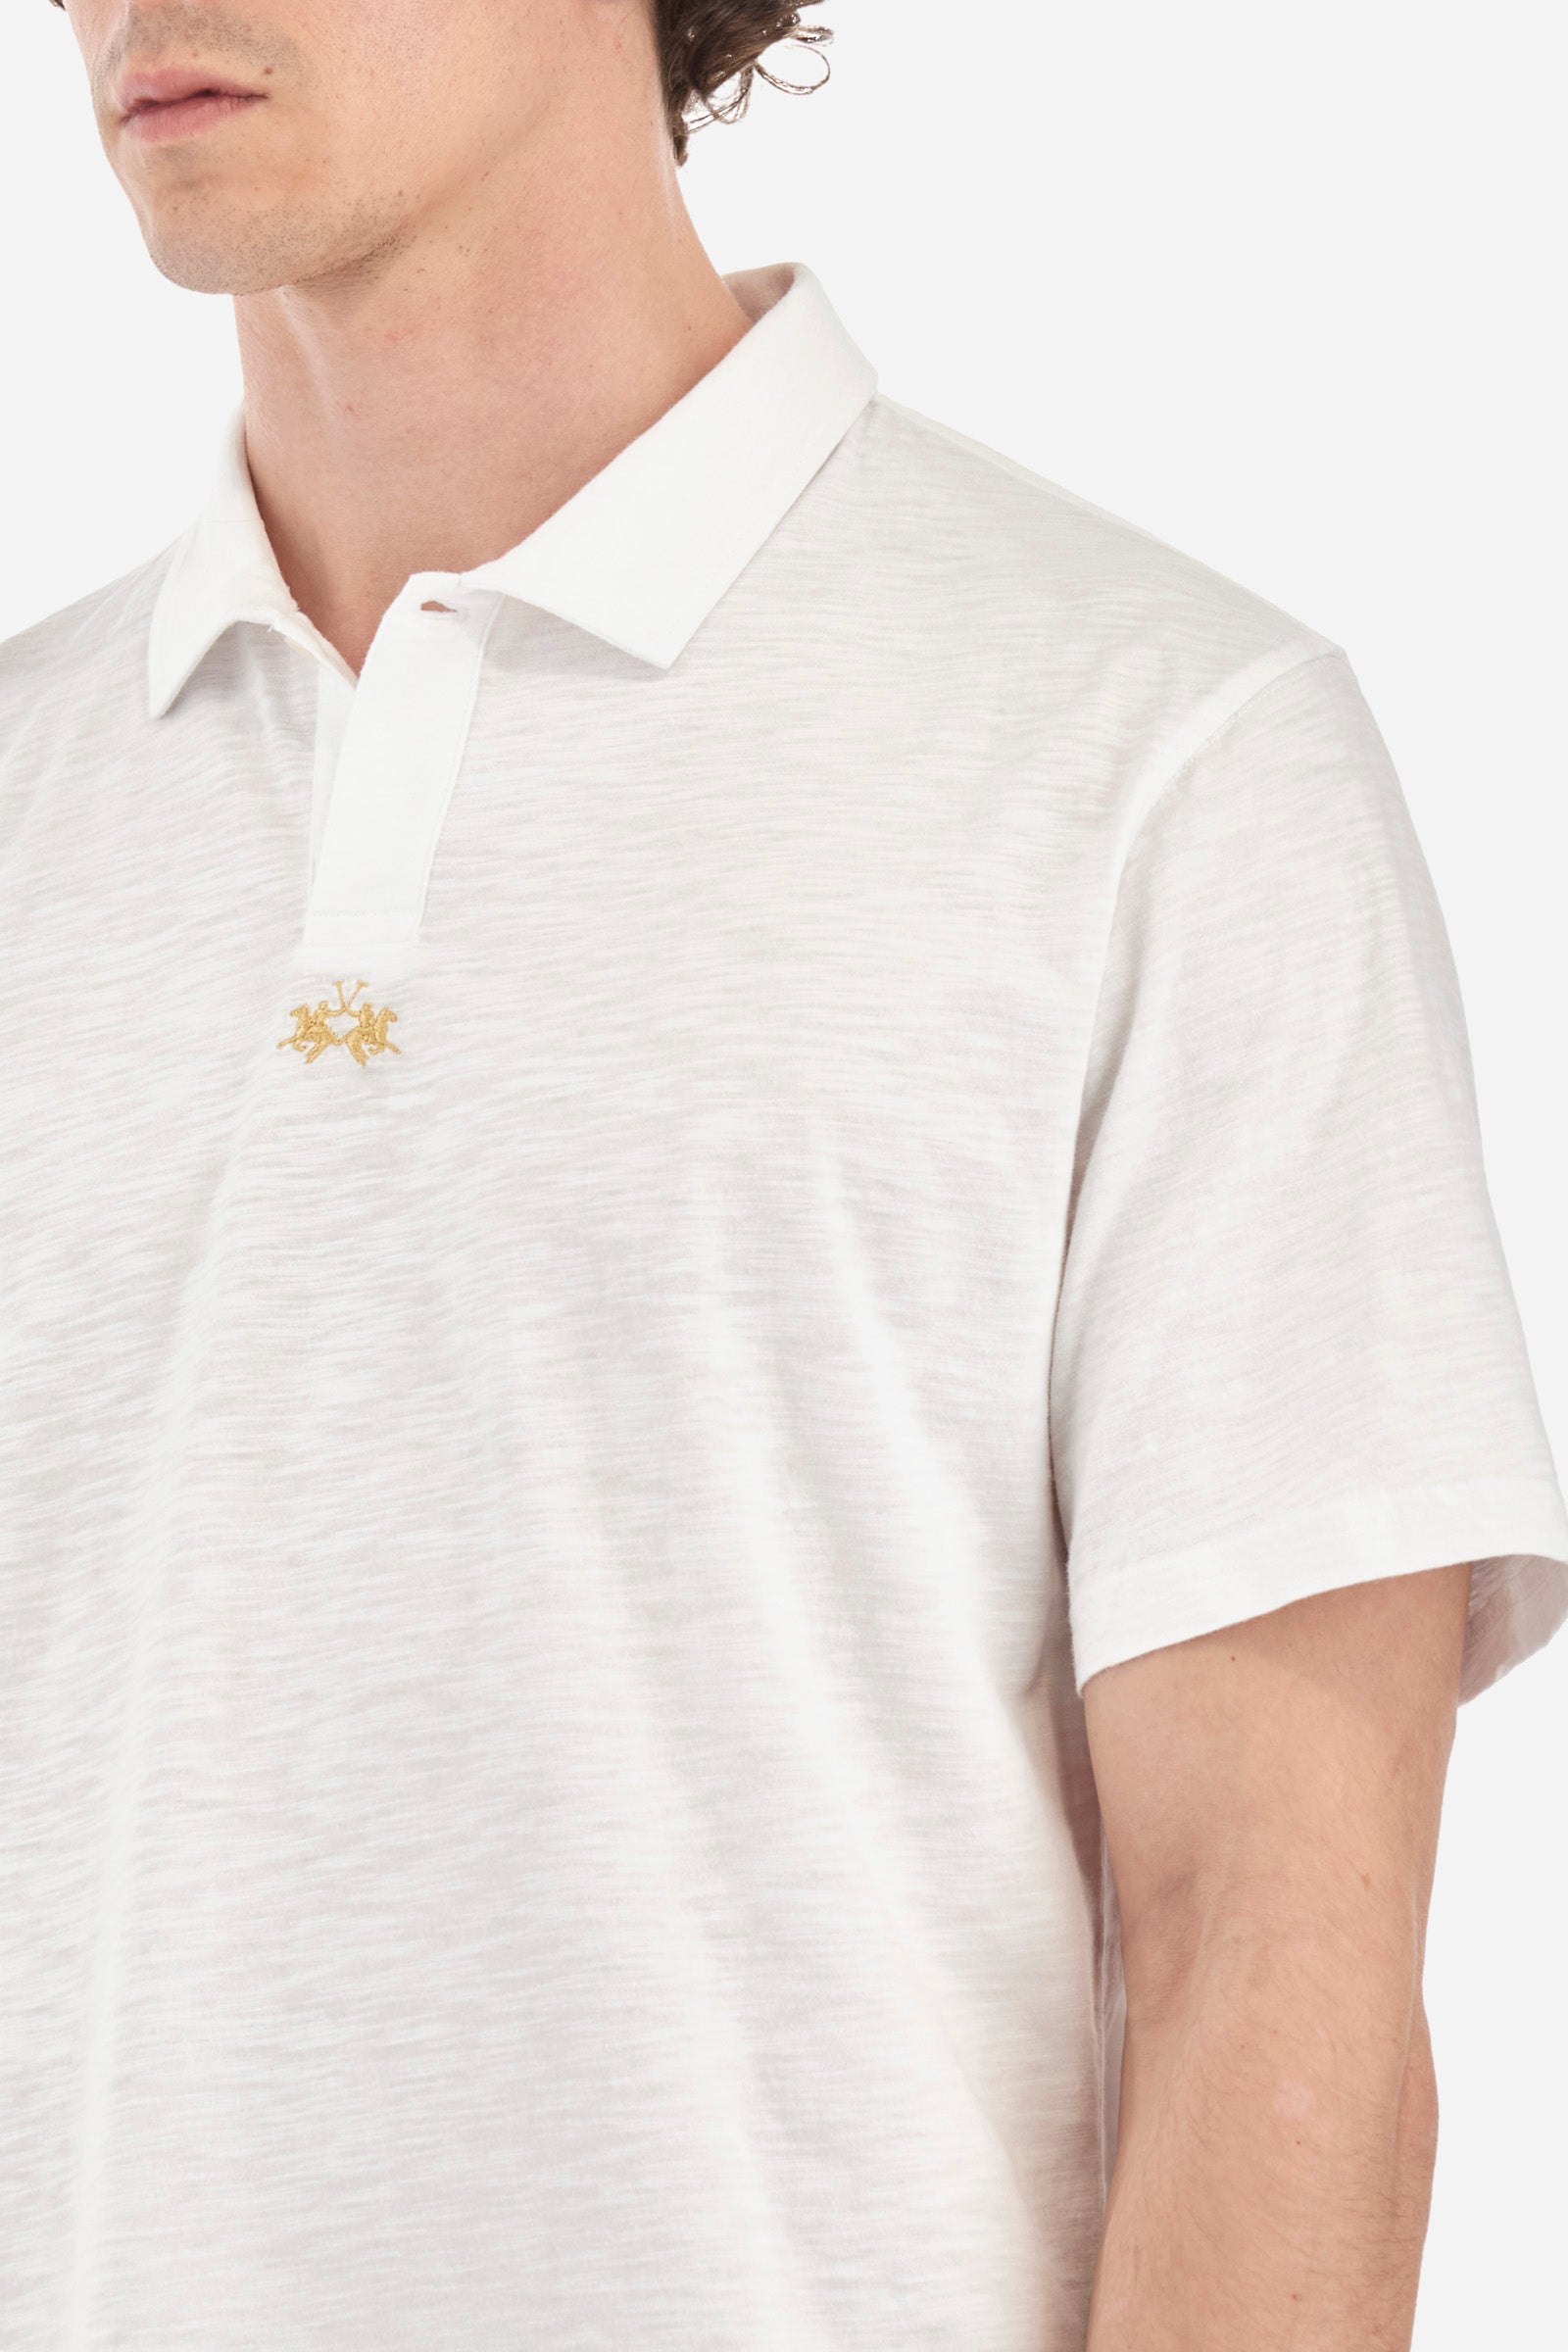 Men's polo shirt in a regular fit - Polo 19-42